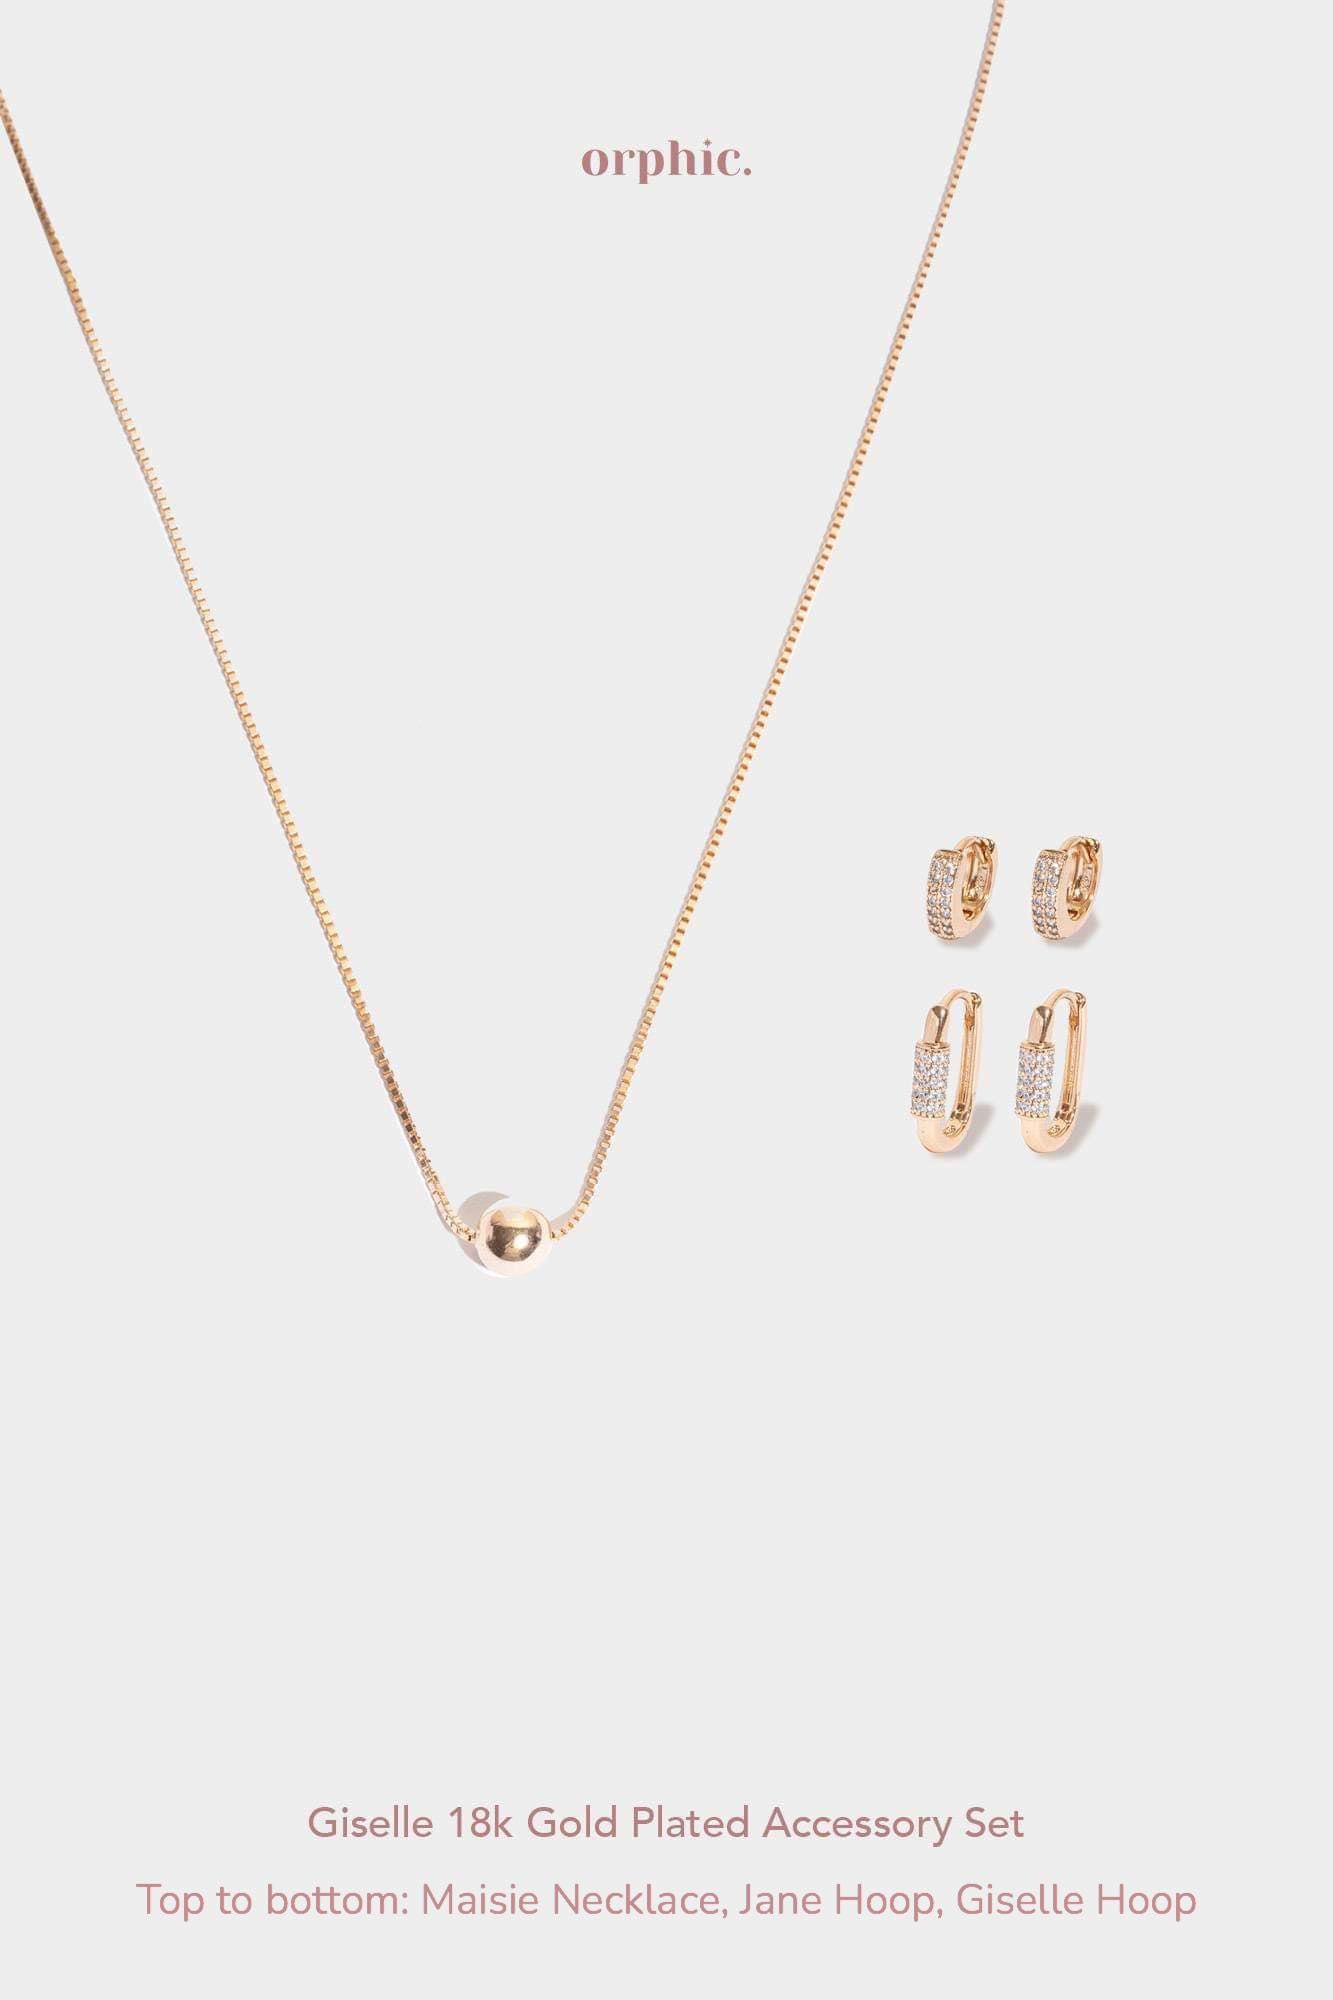 Giselle 18k Gold Plated Accessory Set